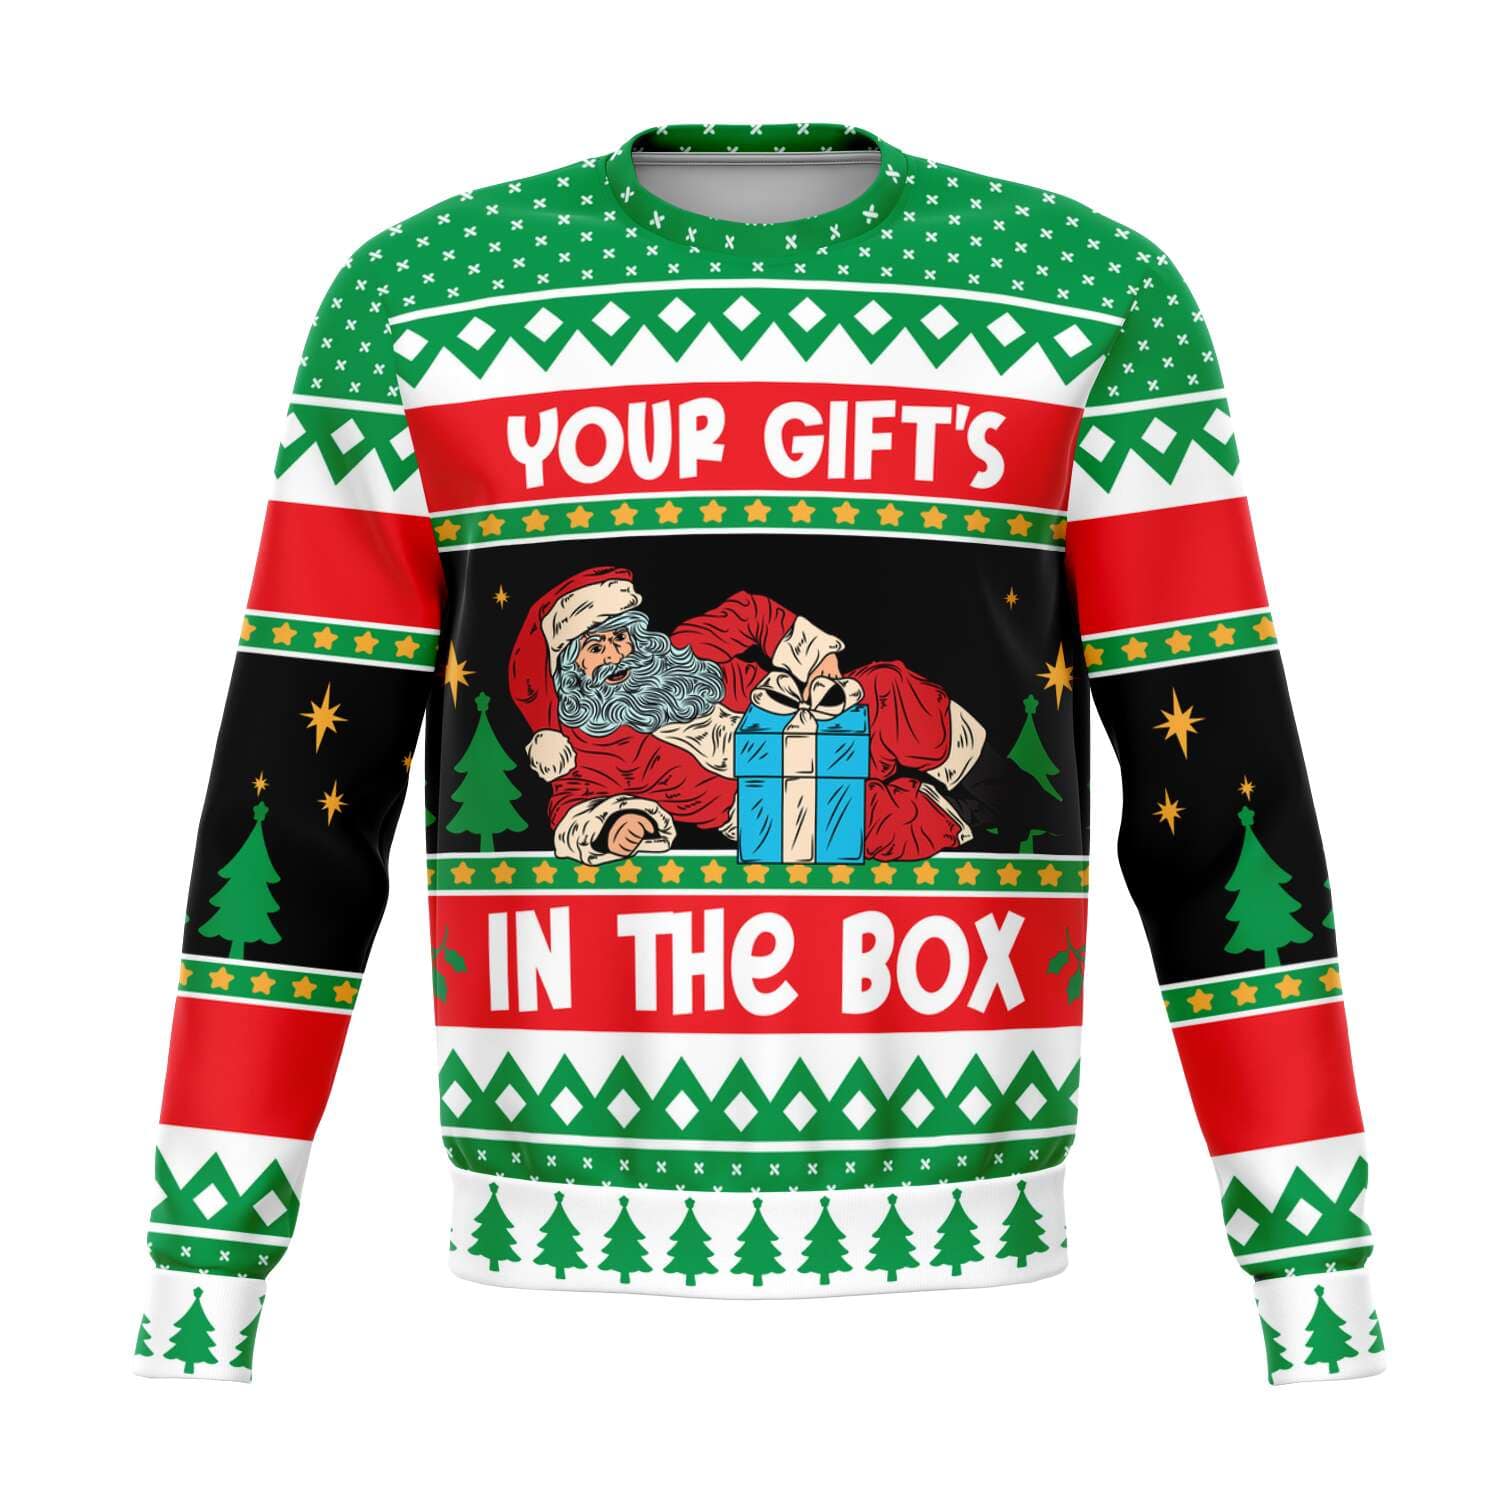 SUBLIMINATOR Your Gift's In The Box Ugly Christmas Sweaters Sweatshirt XS SBSWF_D-1723-XS